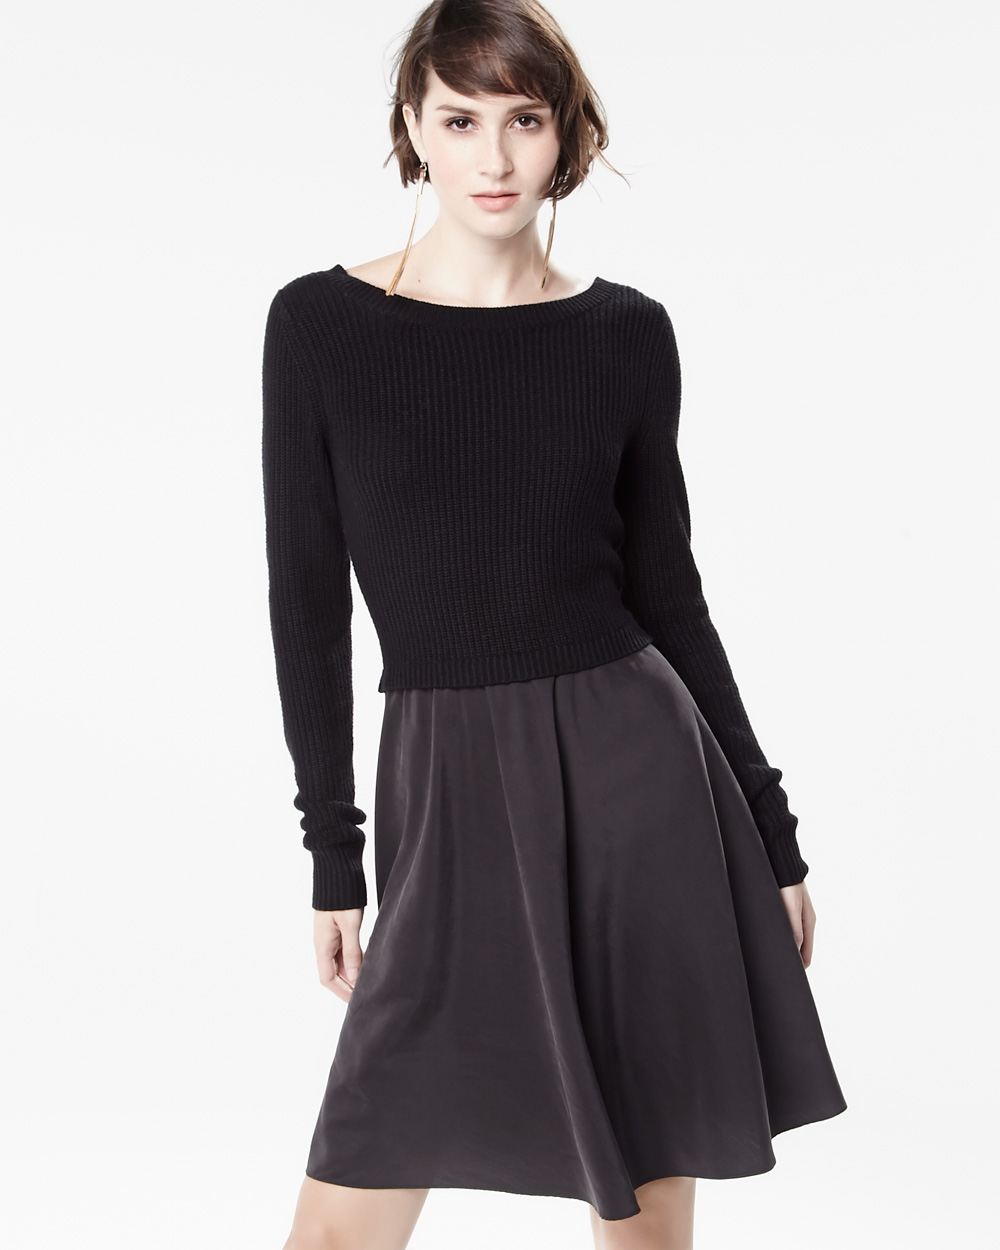 Sweater dress with skater skirt | RW&CO.